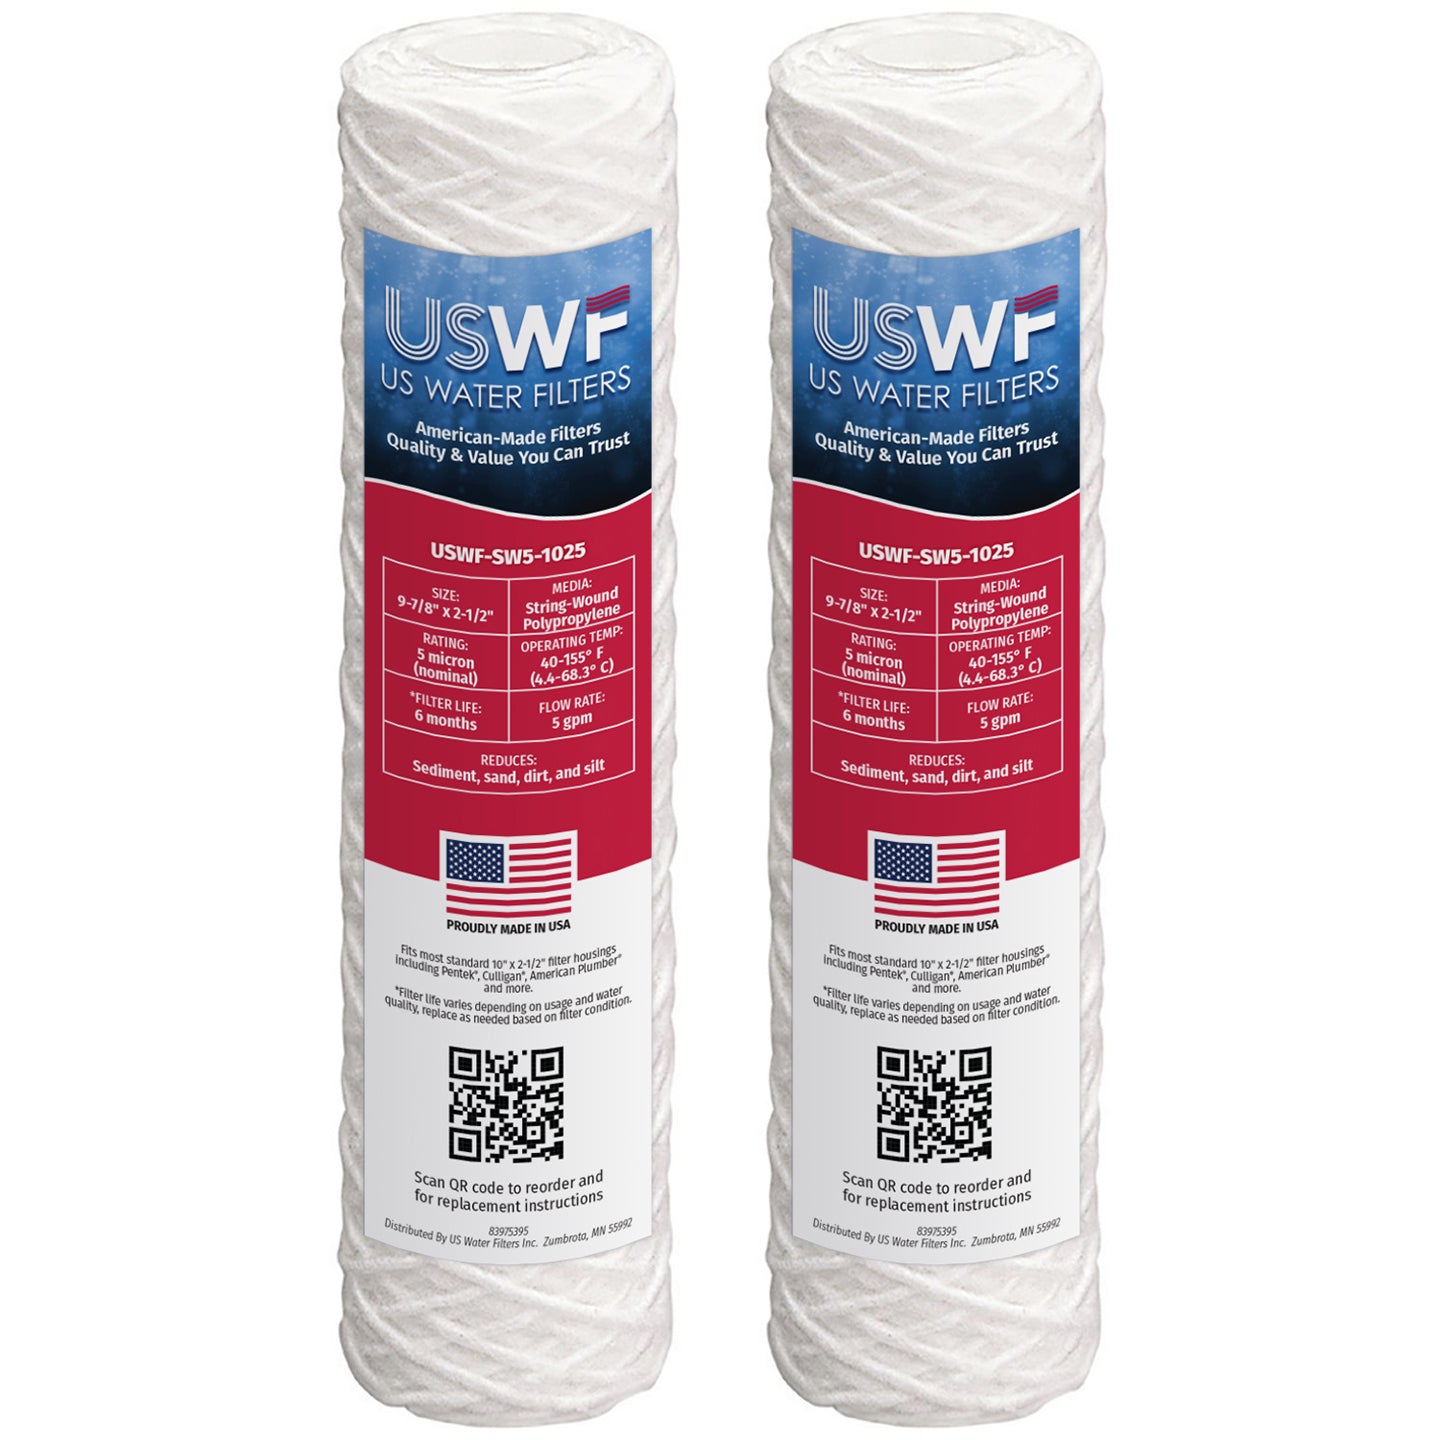 5 Micron String Wound Sediment Filter by USWF 10"x2.5"